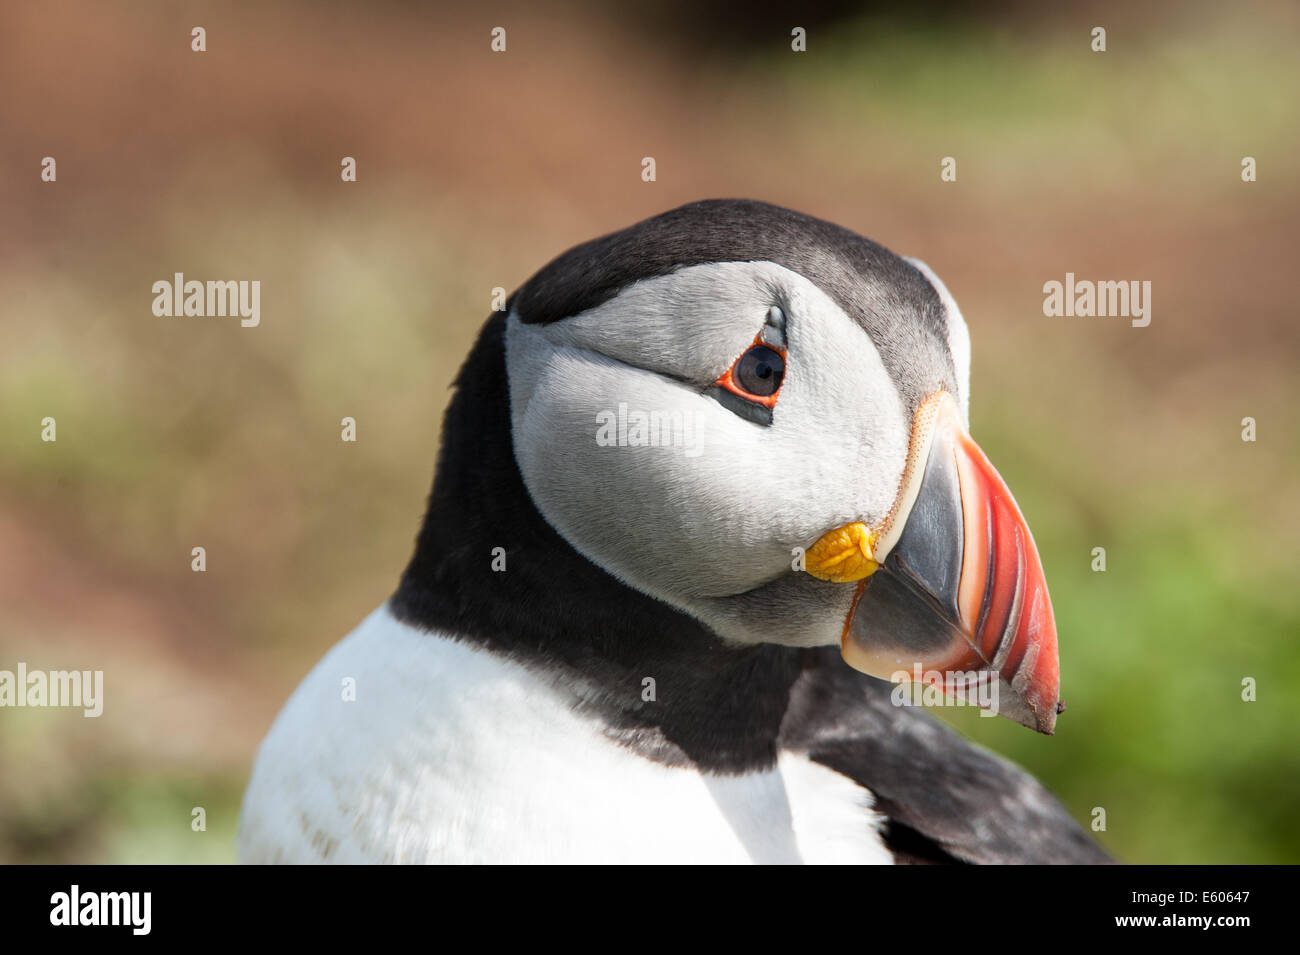 A close-up image of the head of an Atlantic Puffin seen on the island of Lunga off Scotland's west coast. Stock Photo